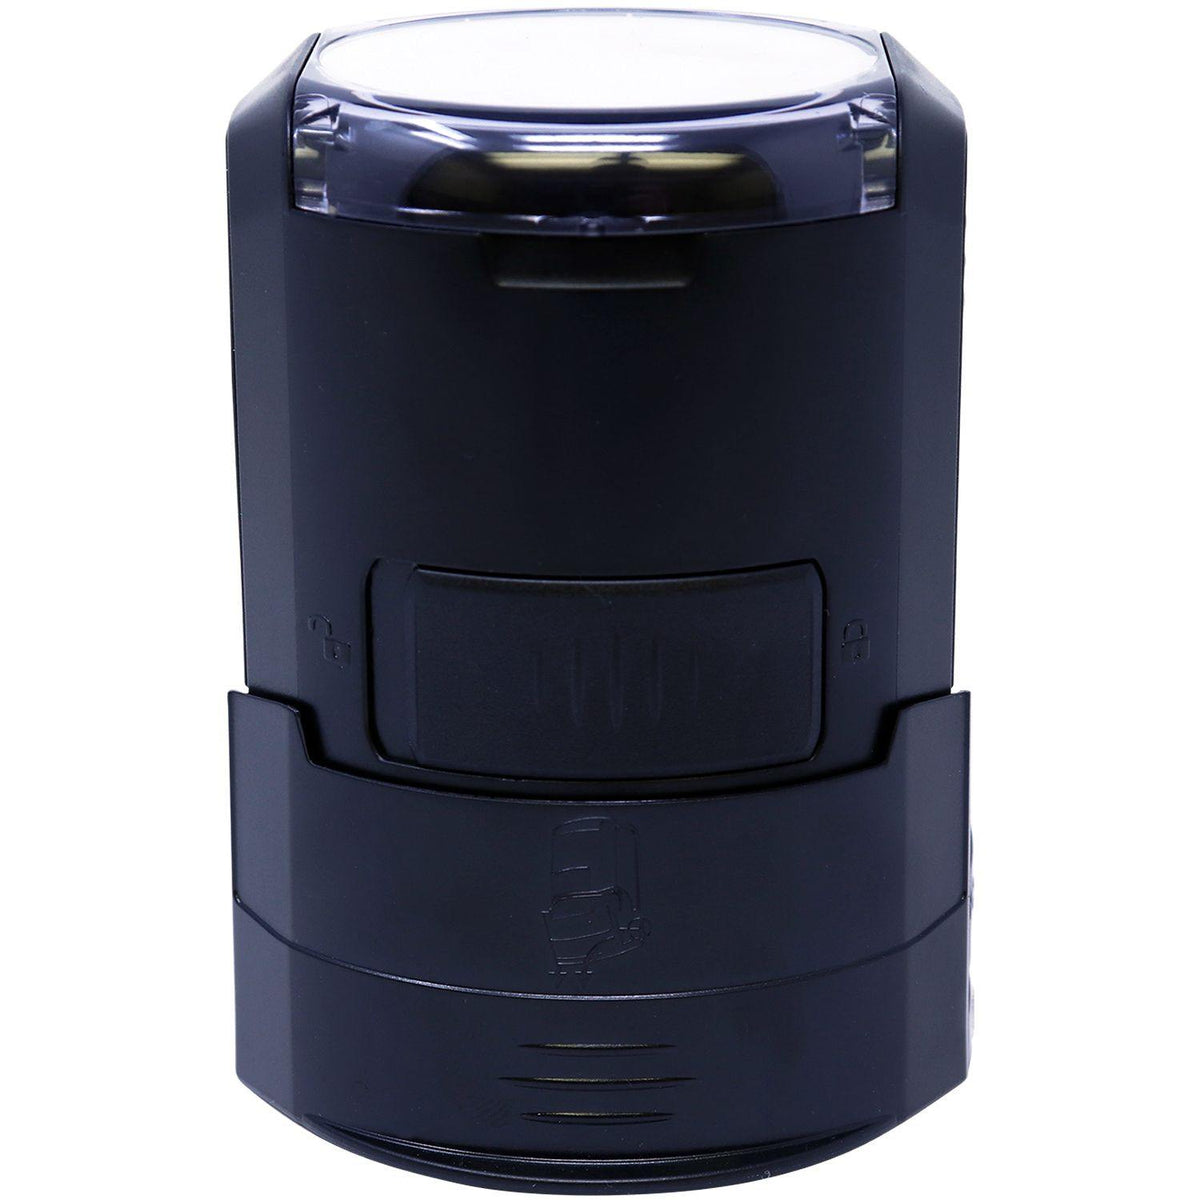 Land Surveyor Self Inking Rubber Stamp of Seal - Engineer Seal Stamps - Stamp Type_Self-Inking, Type of Use_Professional